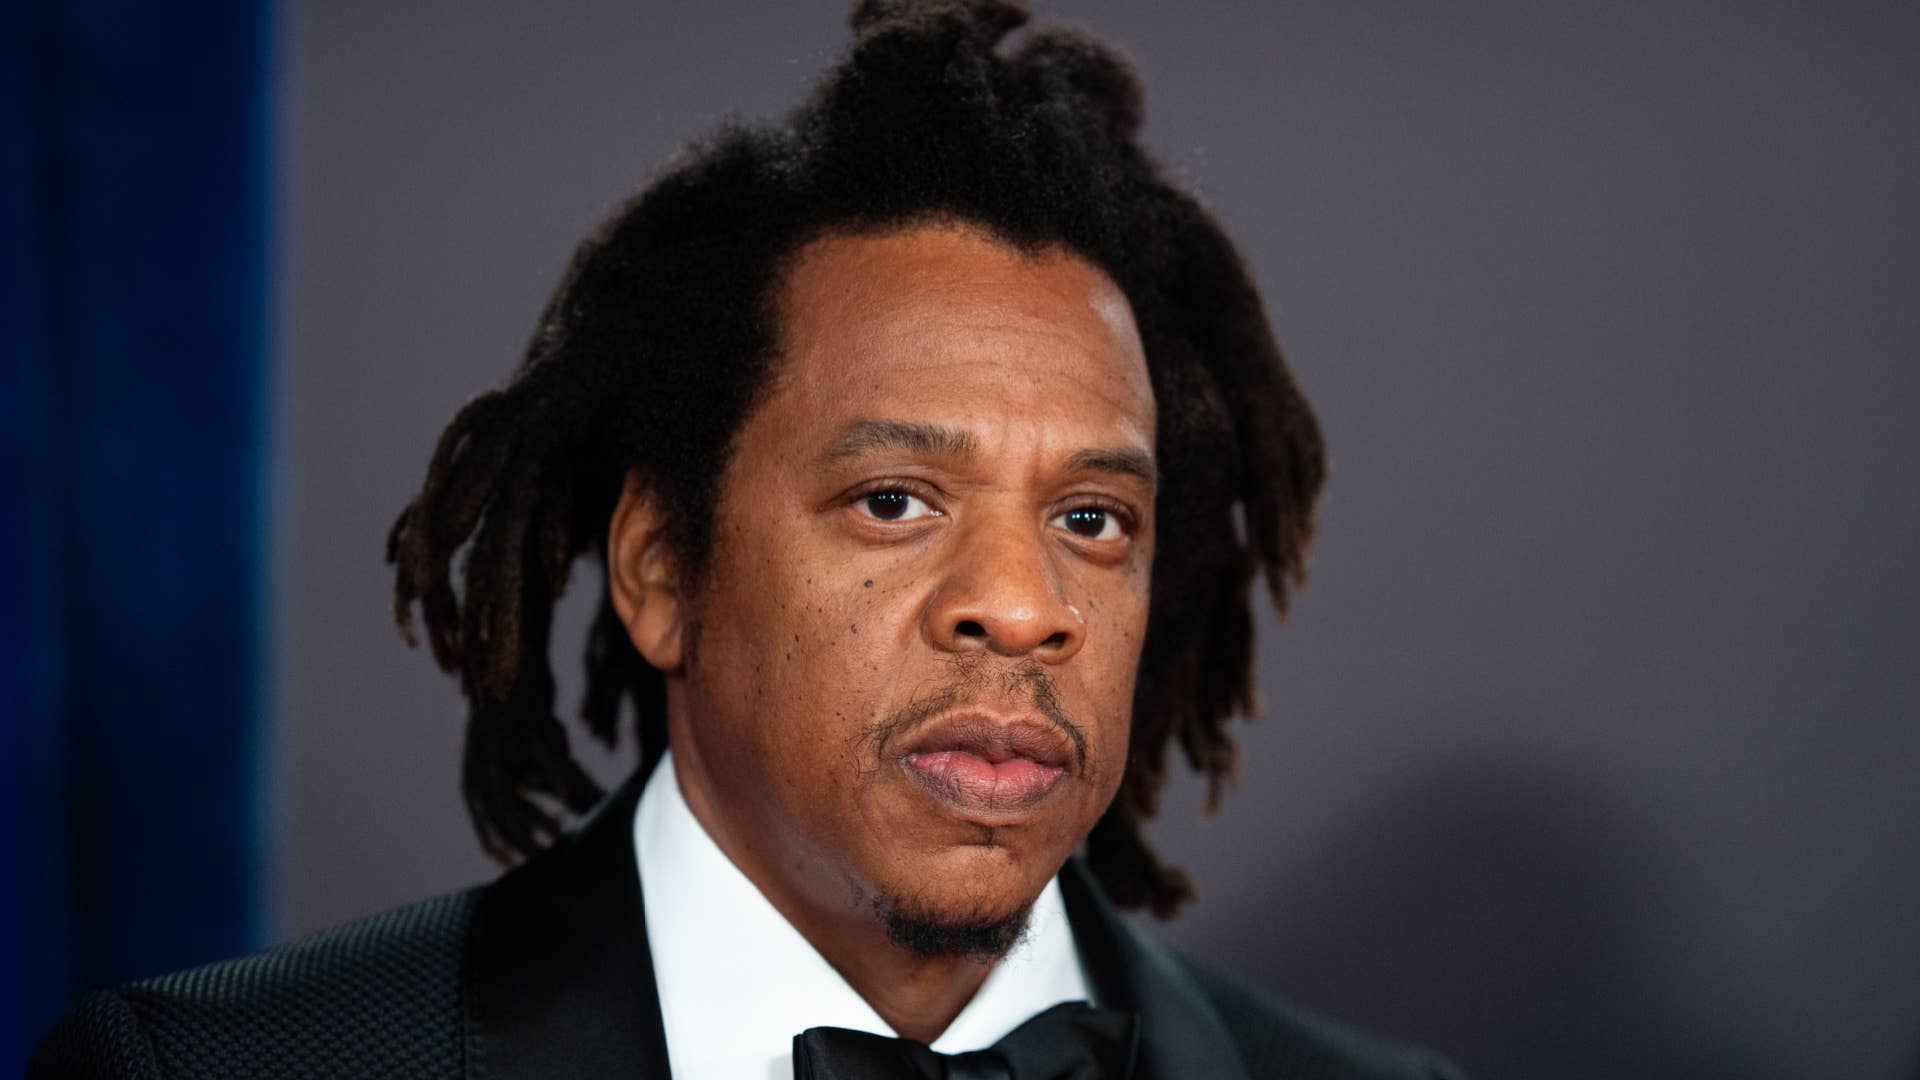 Jay-Z attending 'The Harder They Fall' premiere in London